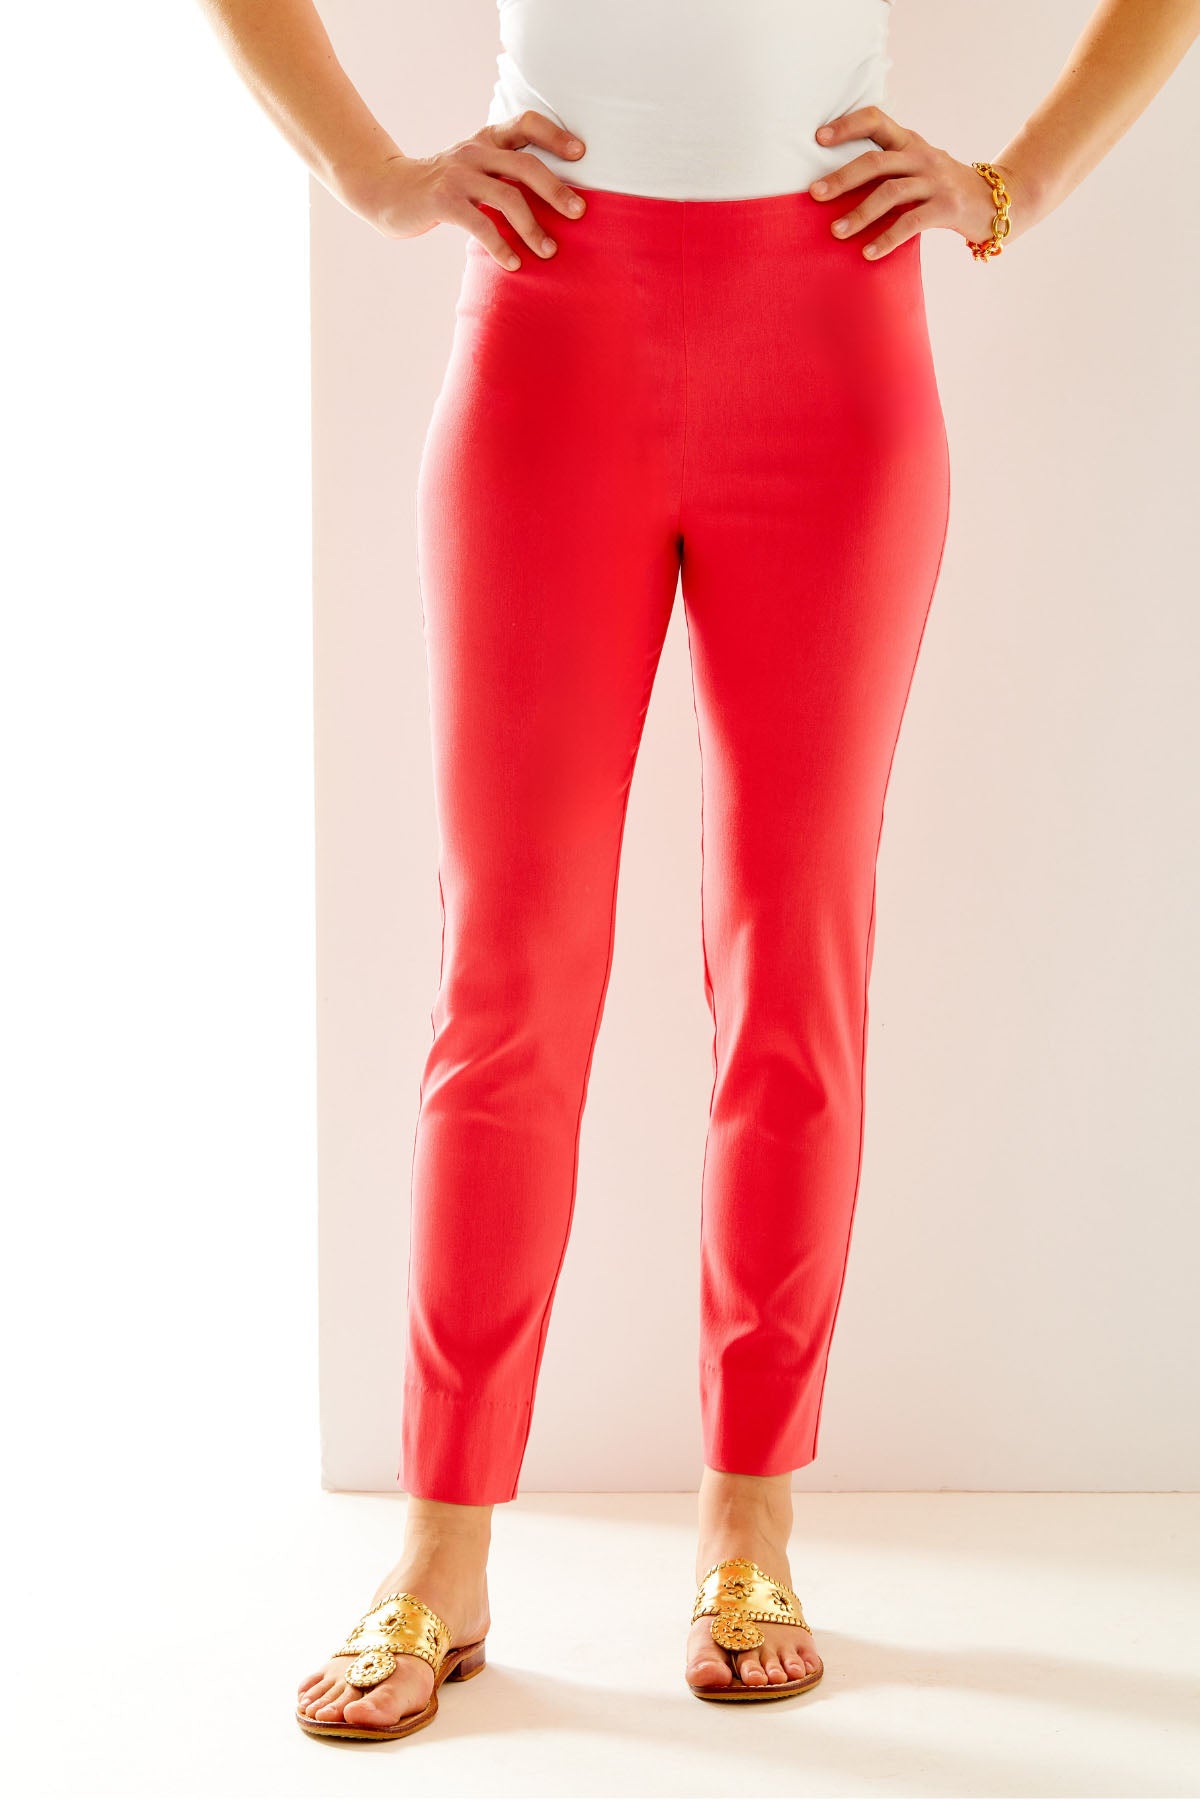 The best-selling Sara Campbell Sheri Pants in coral